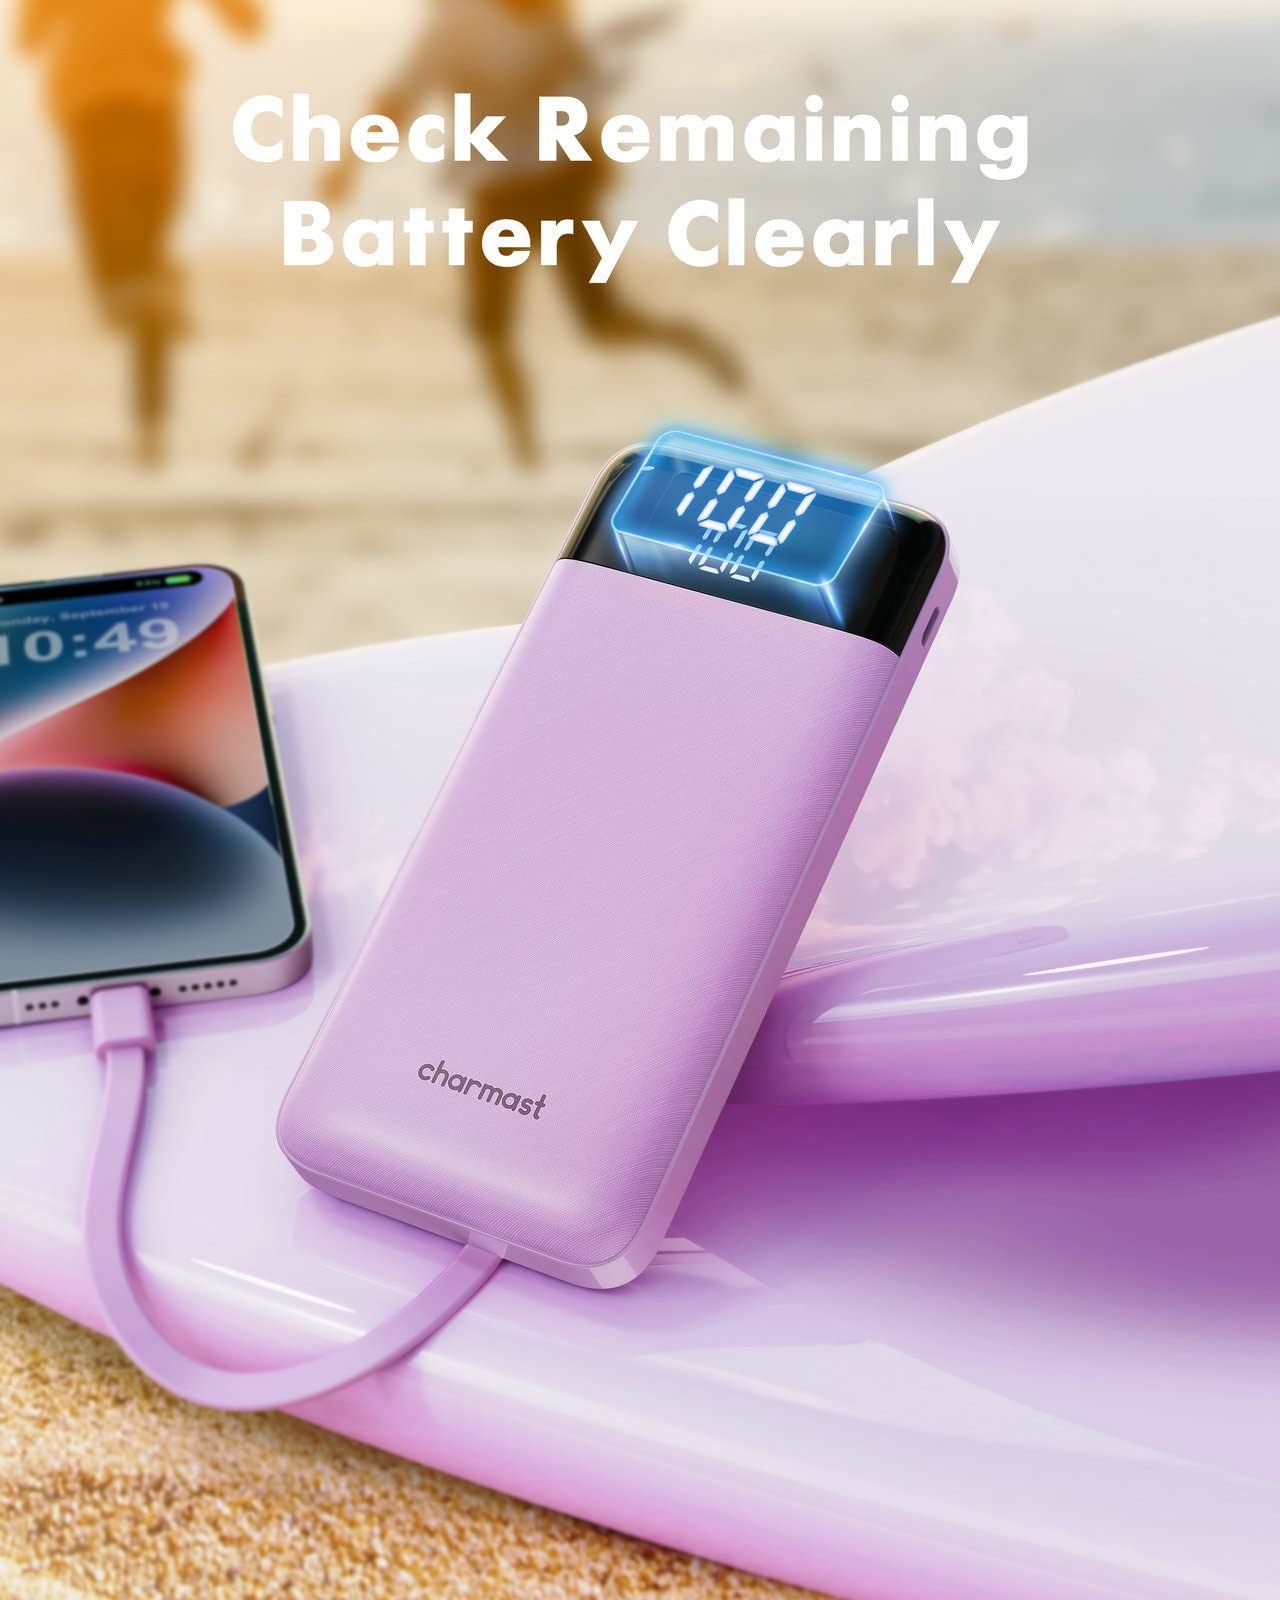 Portable Charger with Built in Cables, Portable Charger with Cords Wires Slim 10000mAh Travel Essentials Battery Pack 6 Outputs 3A High Speed Power Bank for iPhone Samsung Pixel LG Moto iPad